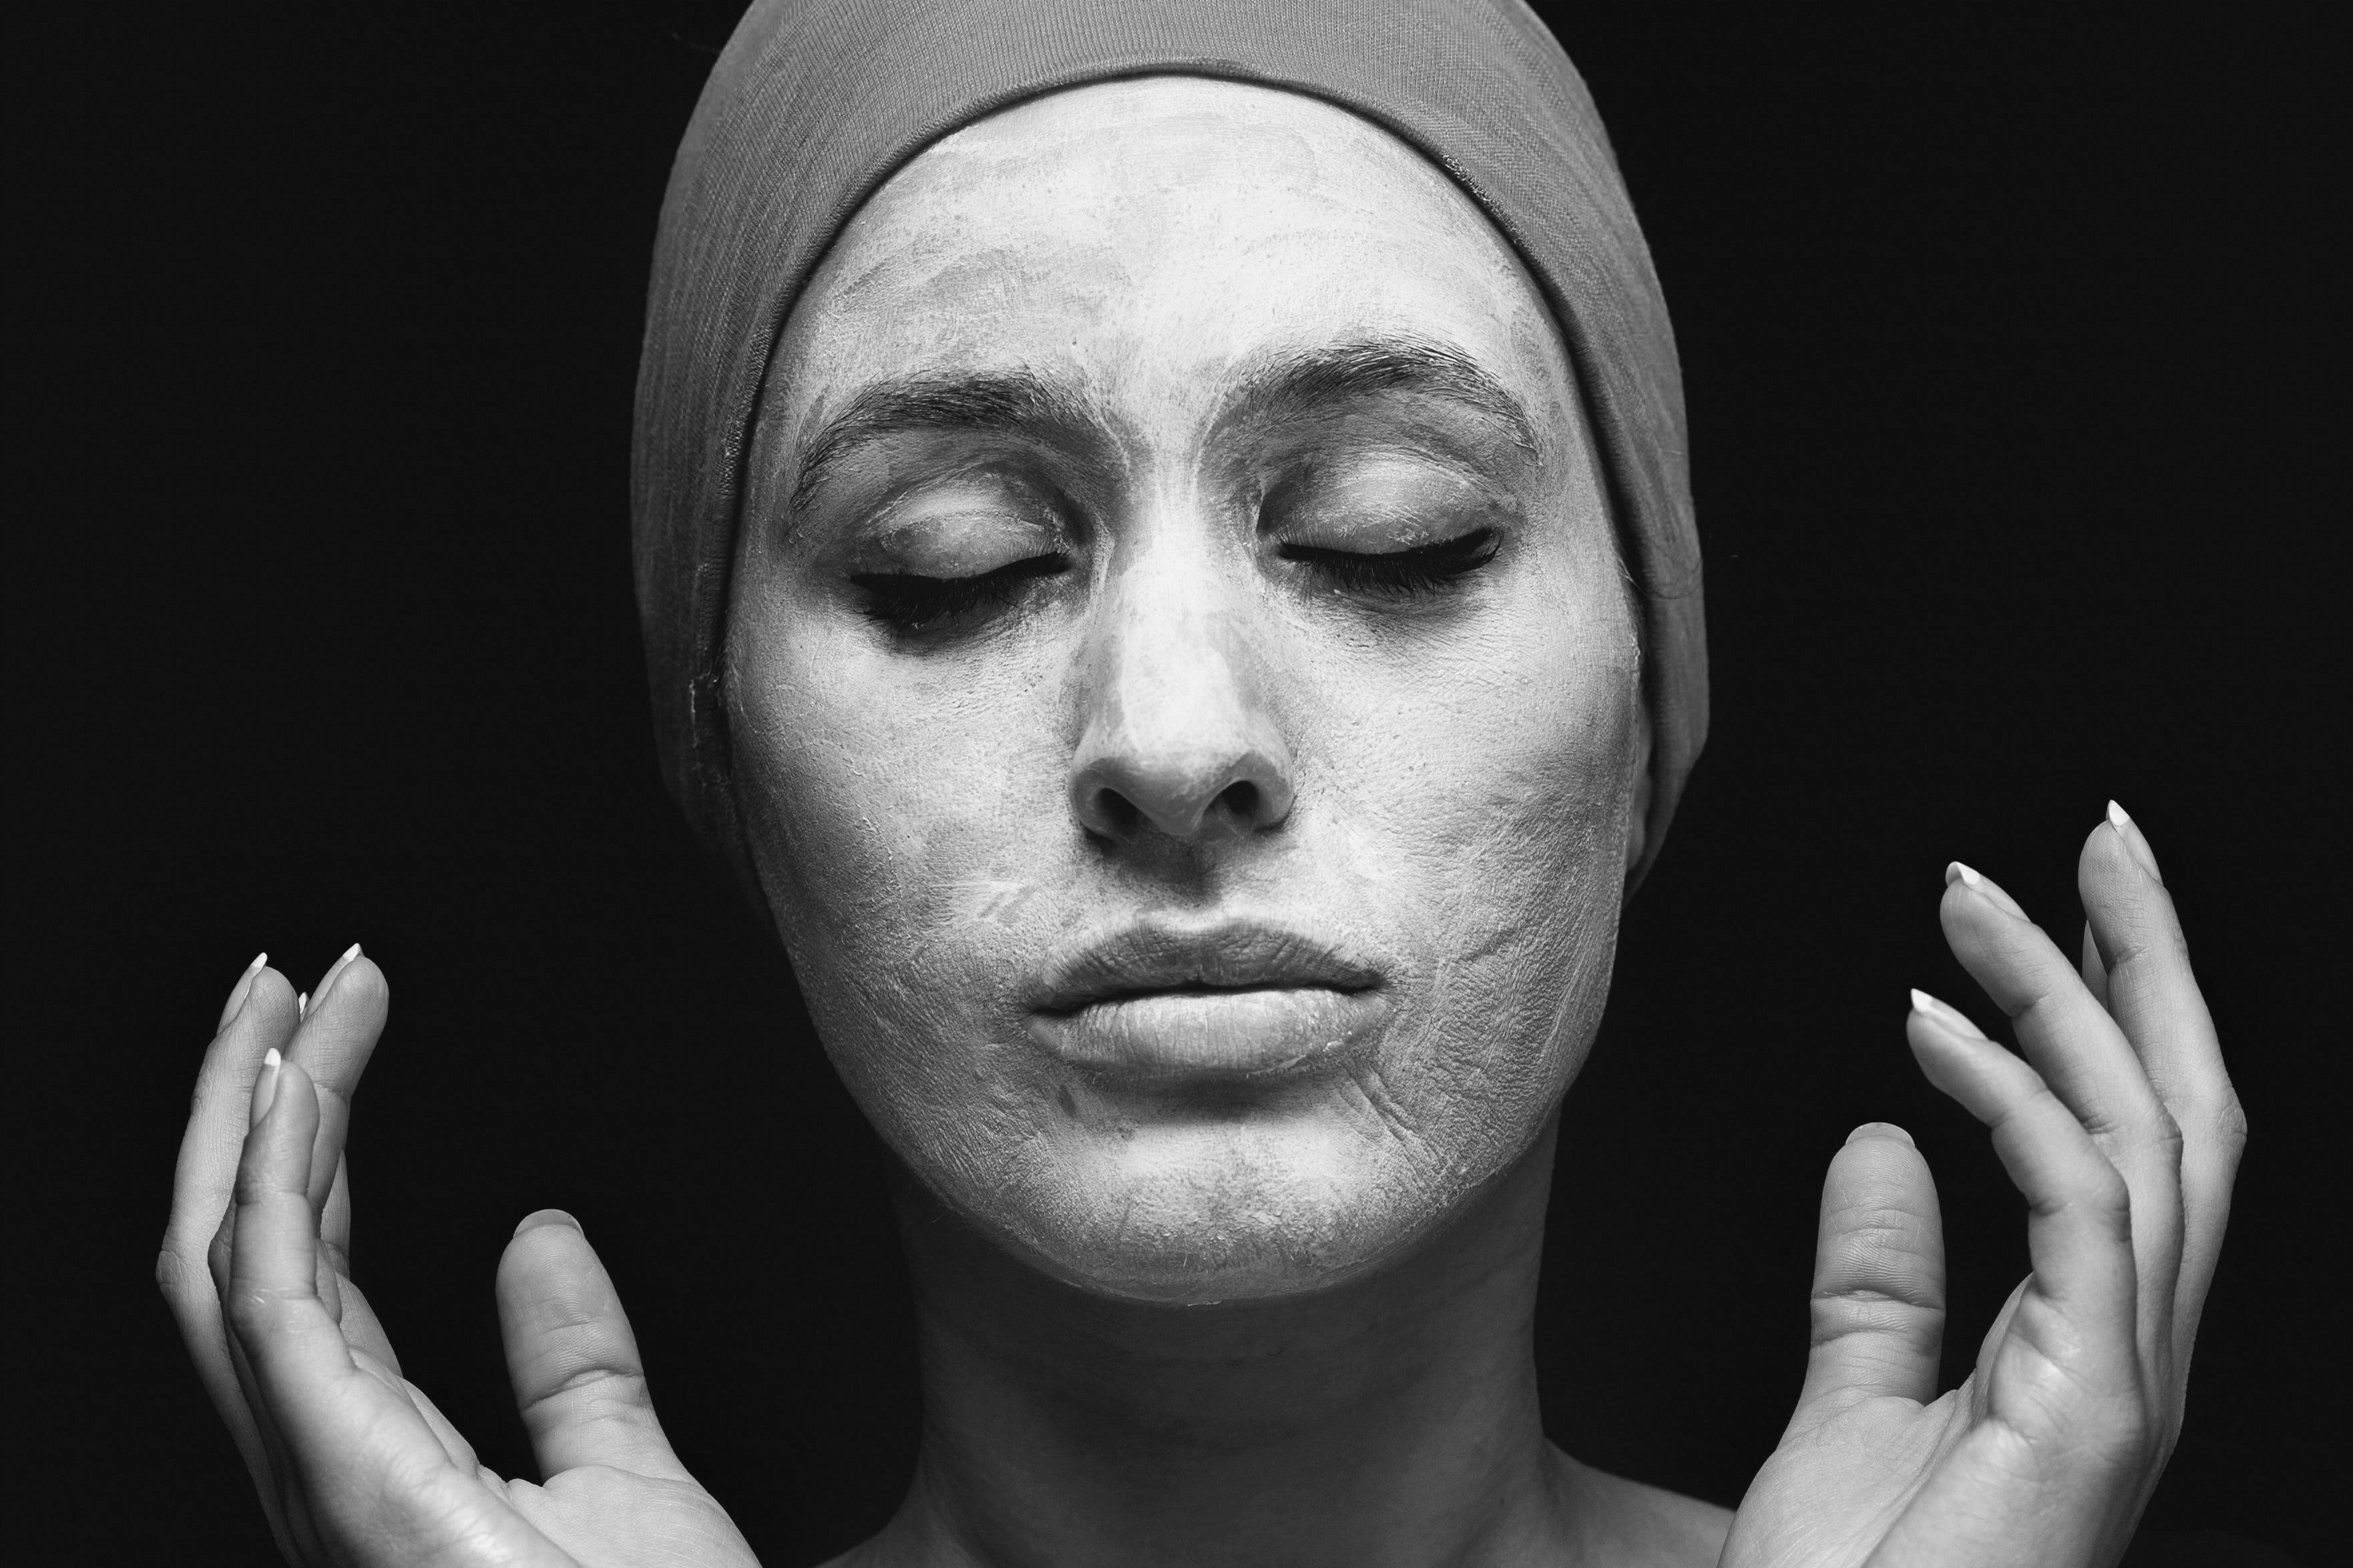 Serene woman with a clay mask and head wrap, eyes closed, against a black background.